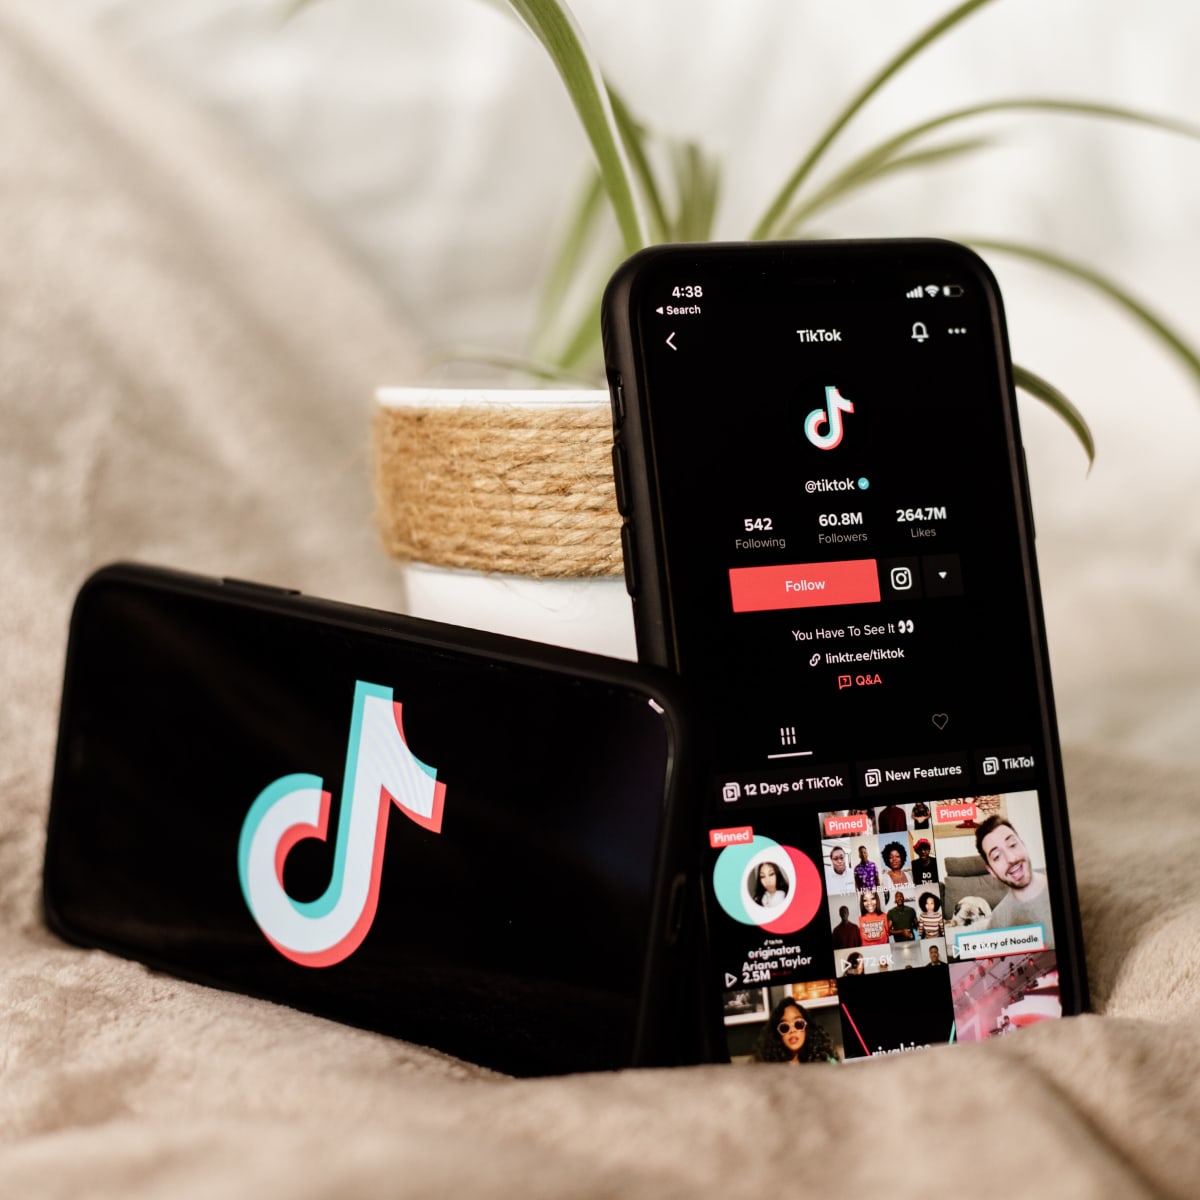 TikTok Now - What Is It and How Does It Work?